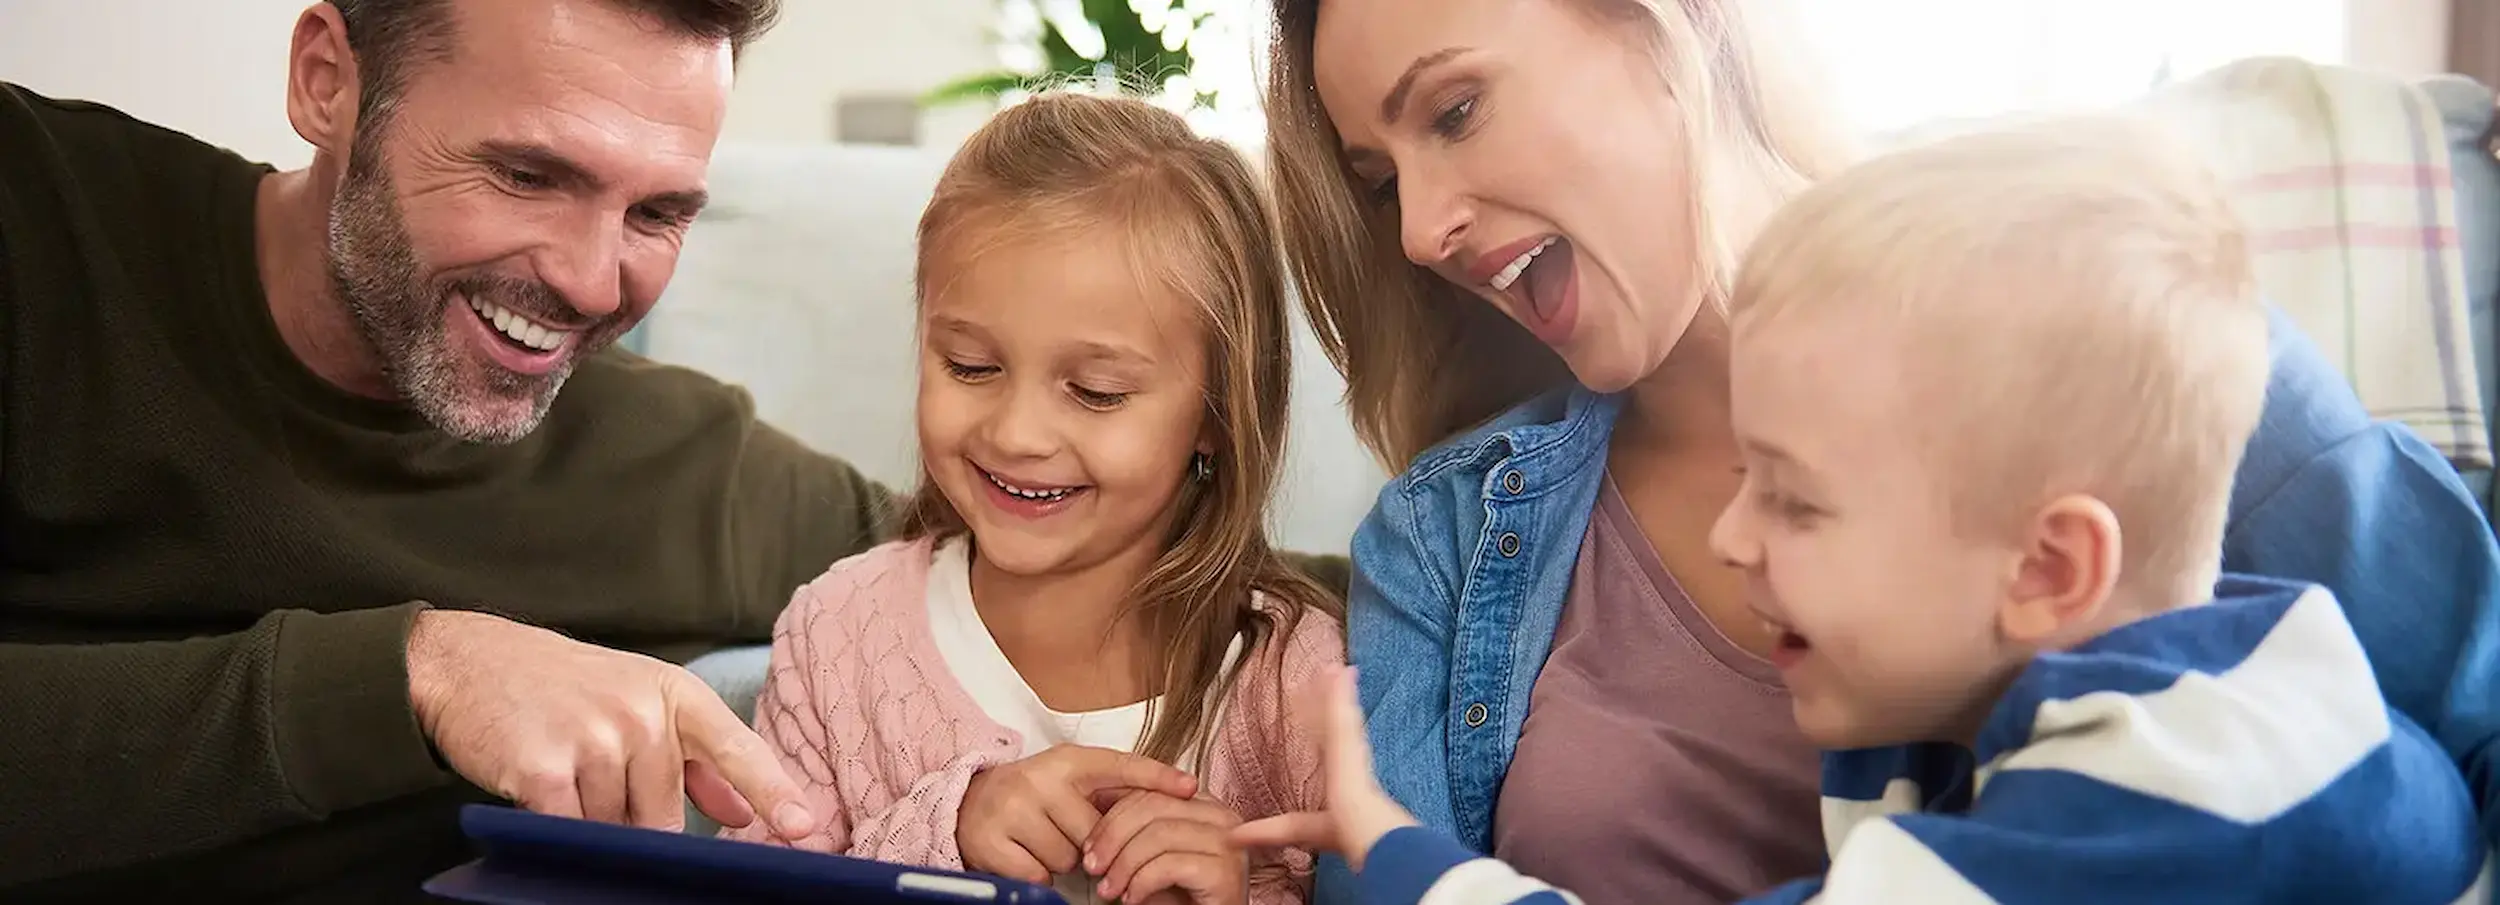 Smiling family of four pointing and smiling at tablet device in brightly lit interior.